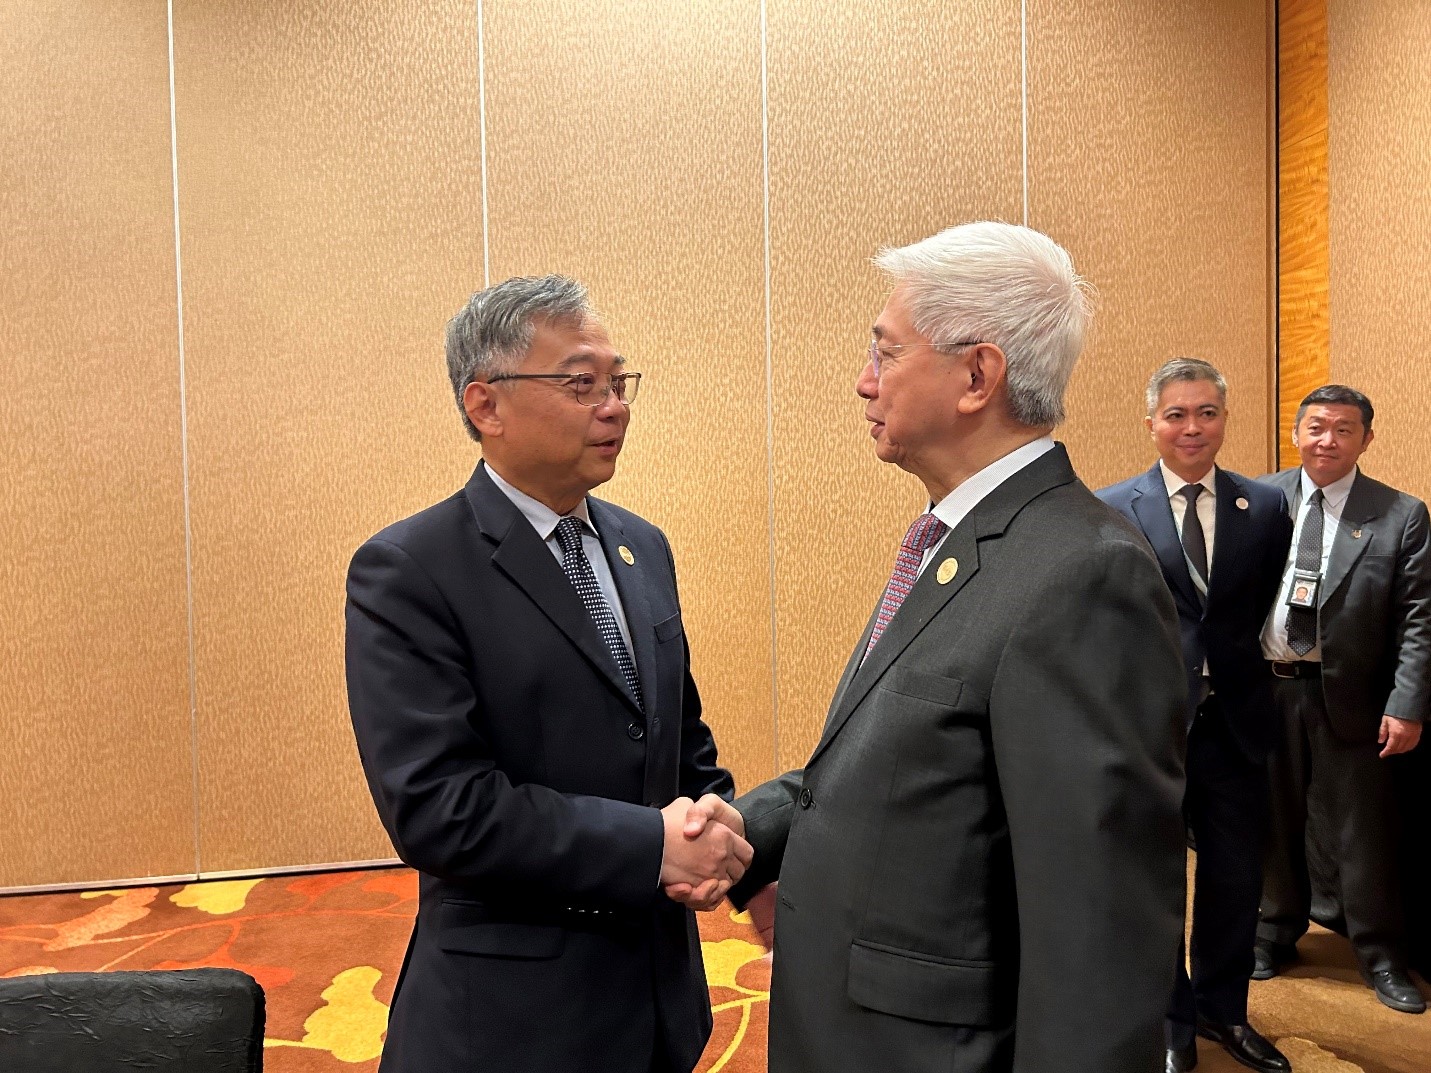 In photo: Deputy Prime Minister and Minister for Trade and Industry of Singapore Gan Kim Yong and DTI Secretary Fred Pascual